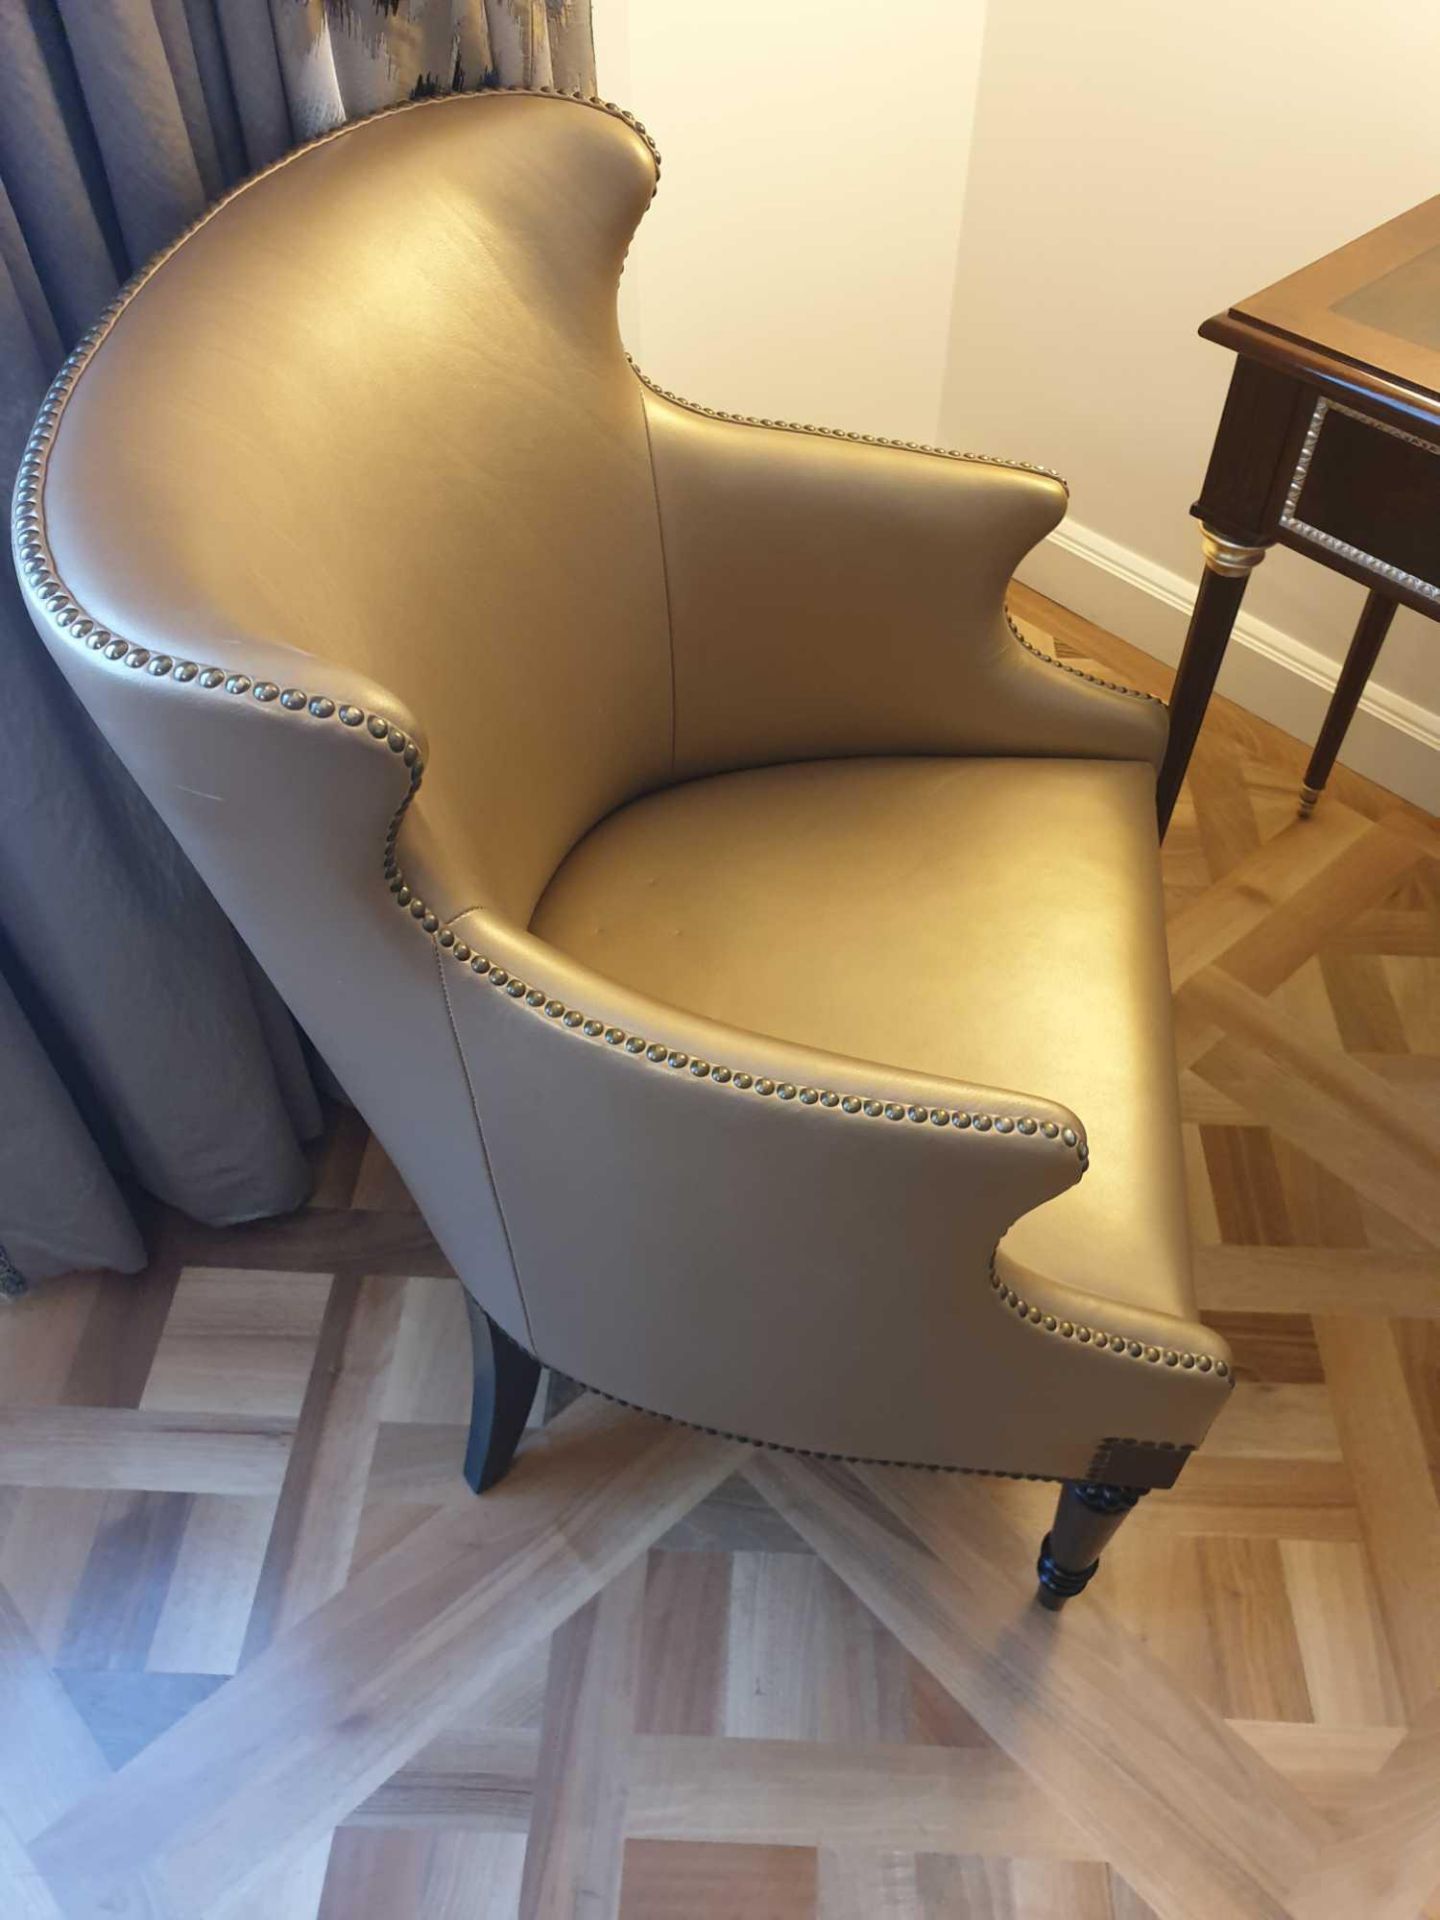 A Modern Wing Back Chair Upholstered In Gold Leather With Pin Stud Detail On Dark Solid Wood Frame - Bild 2 aus 3